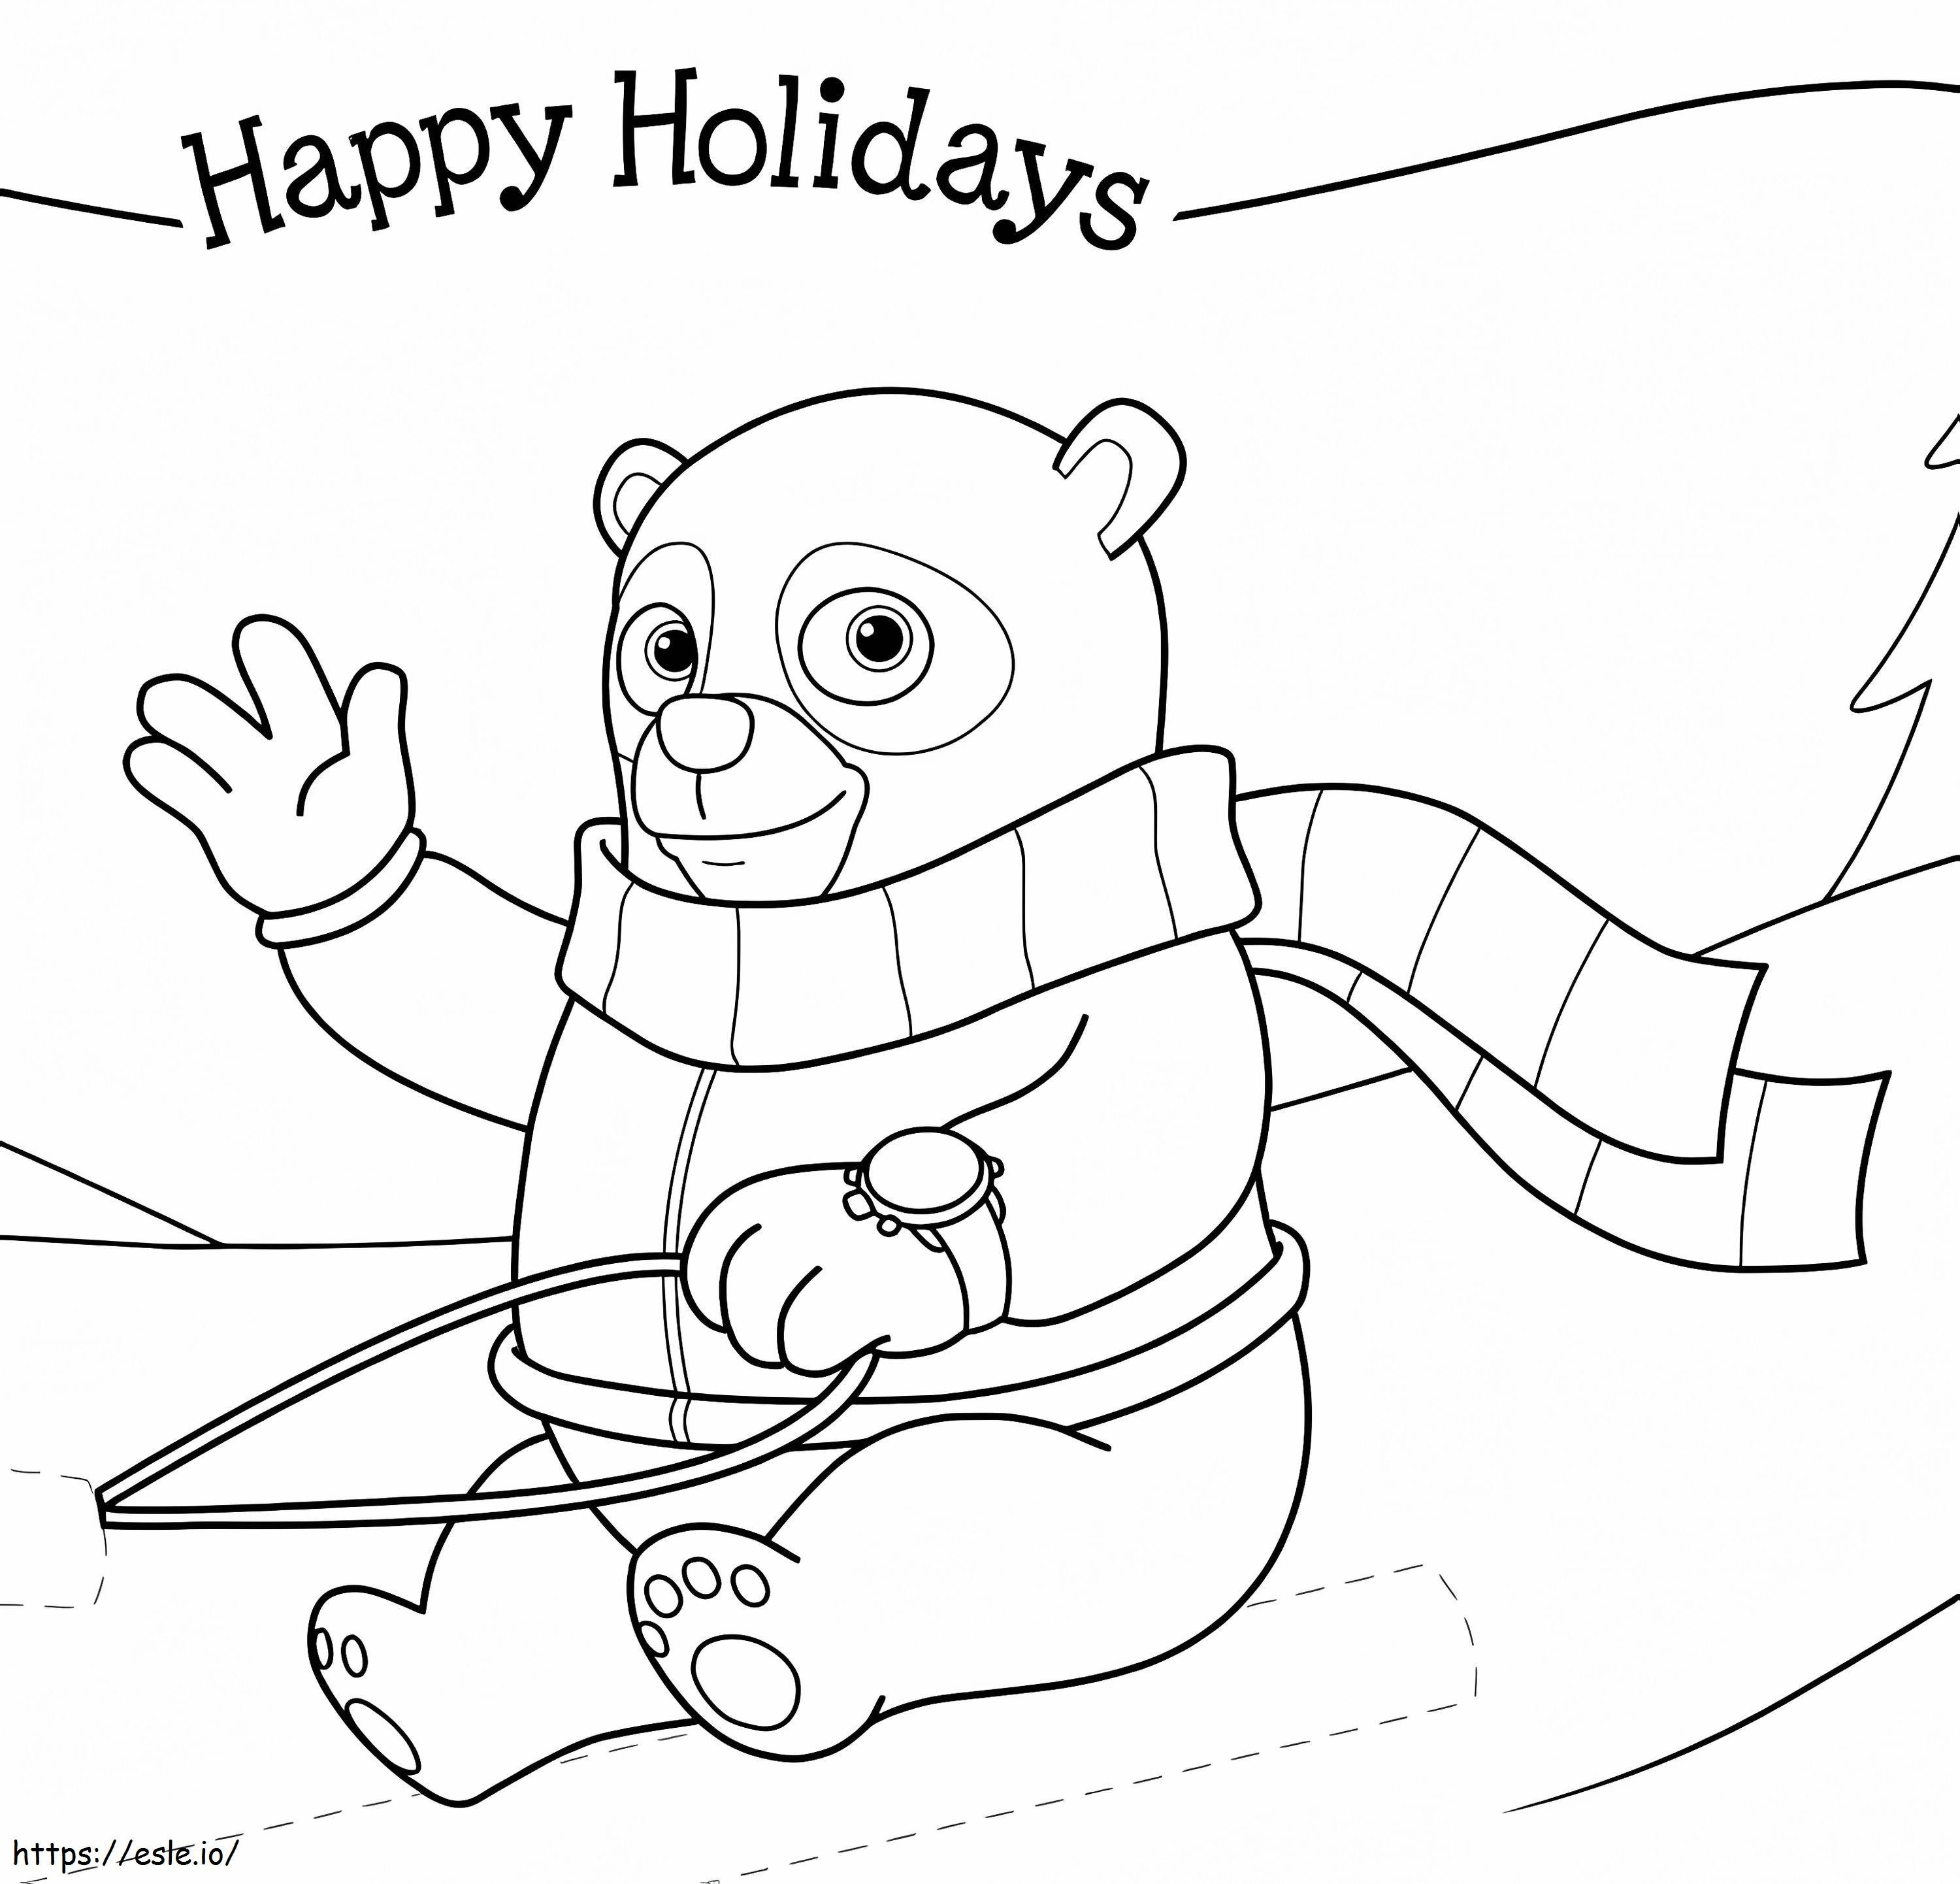 Happy Holidays With Agent Oso coloring page